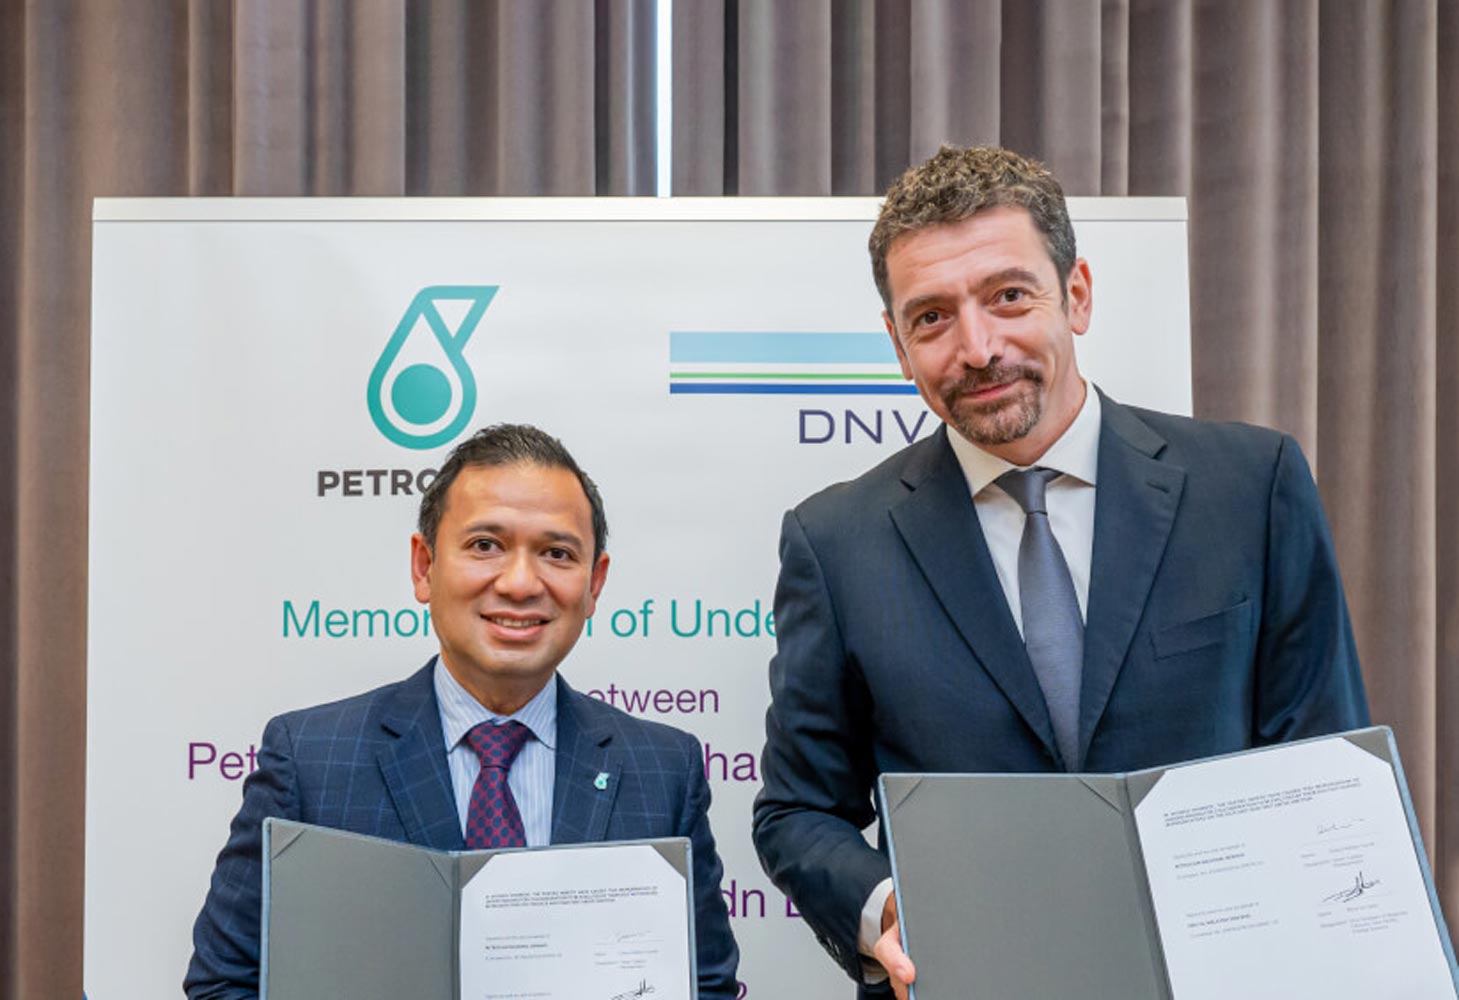 DNV and PETRONAS join forces to support development of CCUS